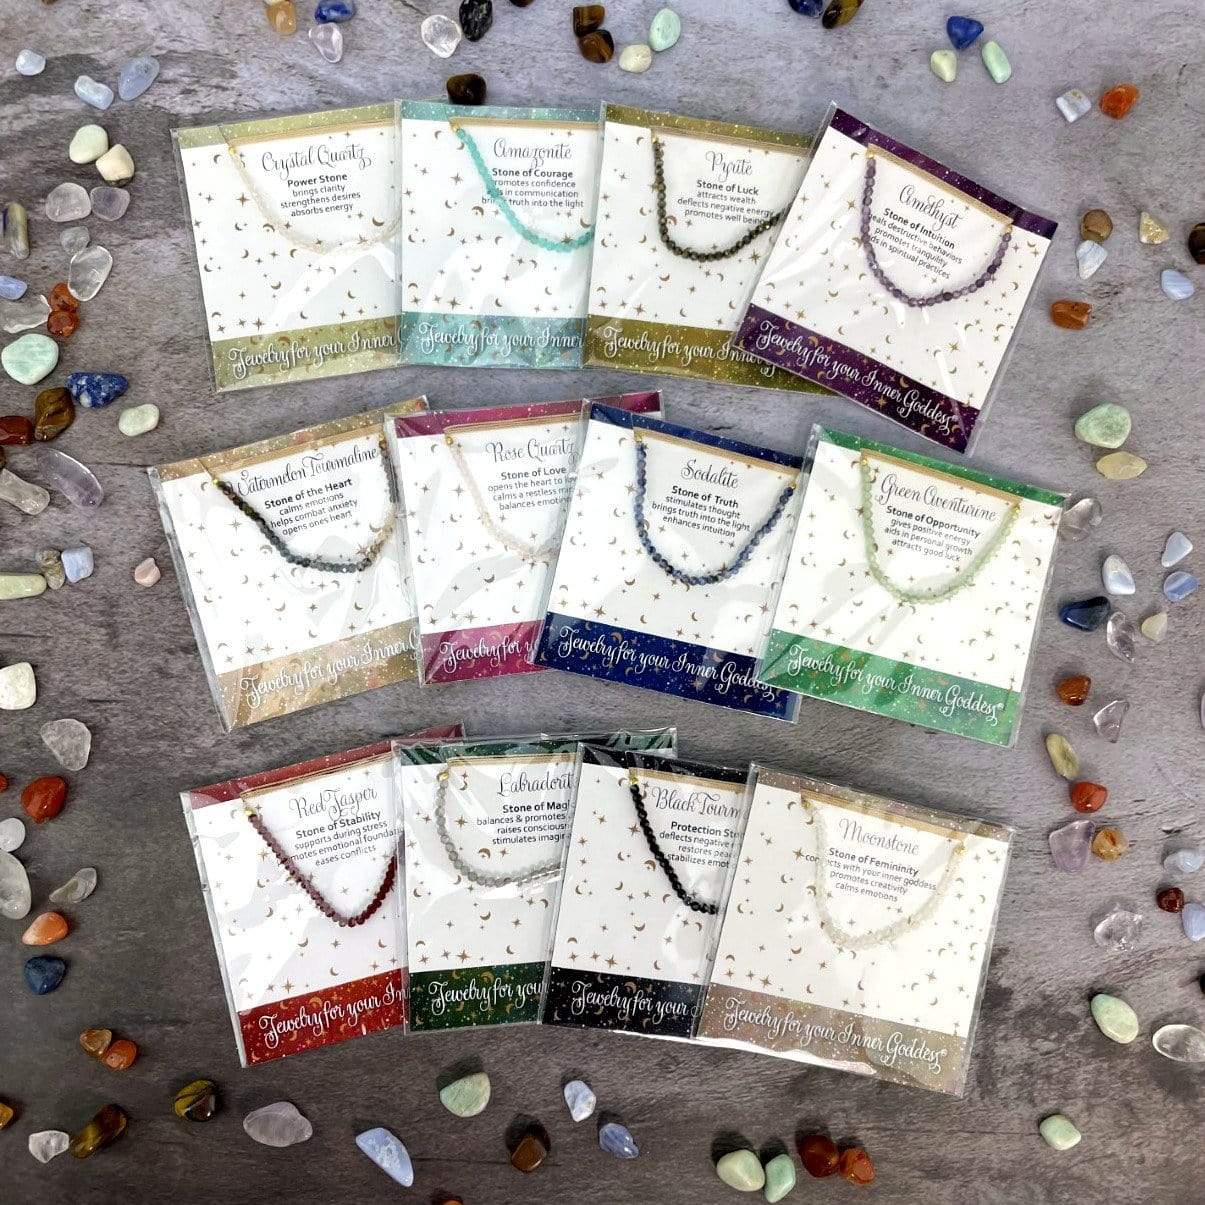 Gemstone Bead Finished Necklaces in their package 